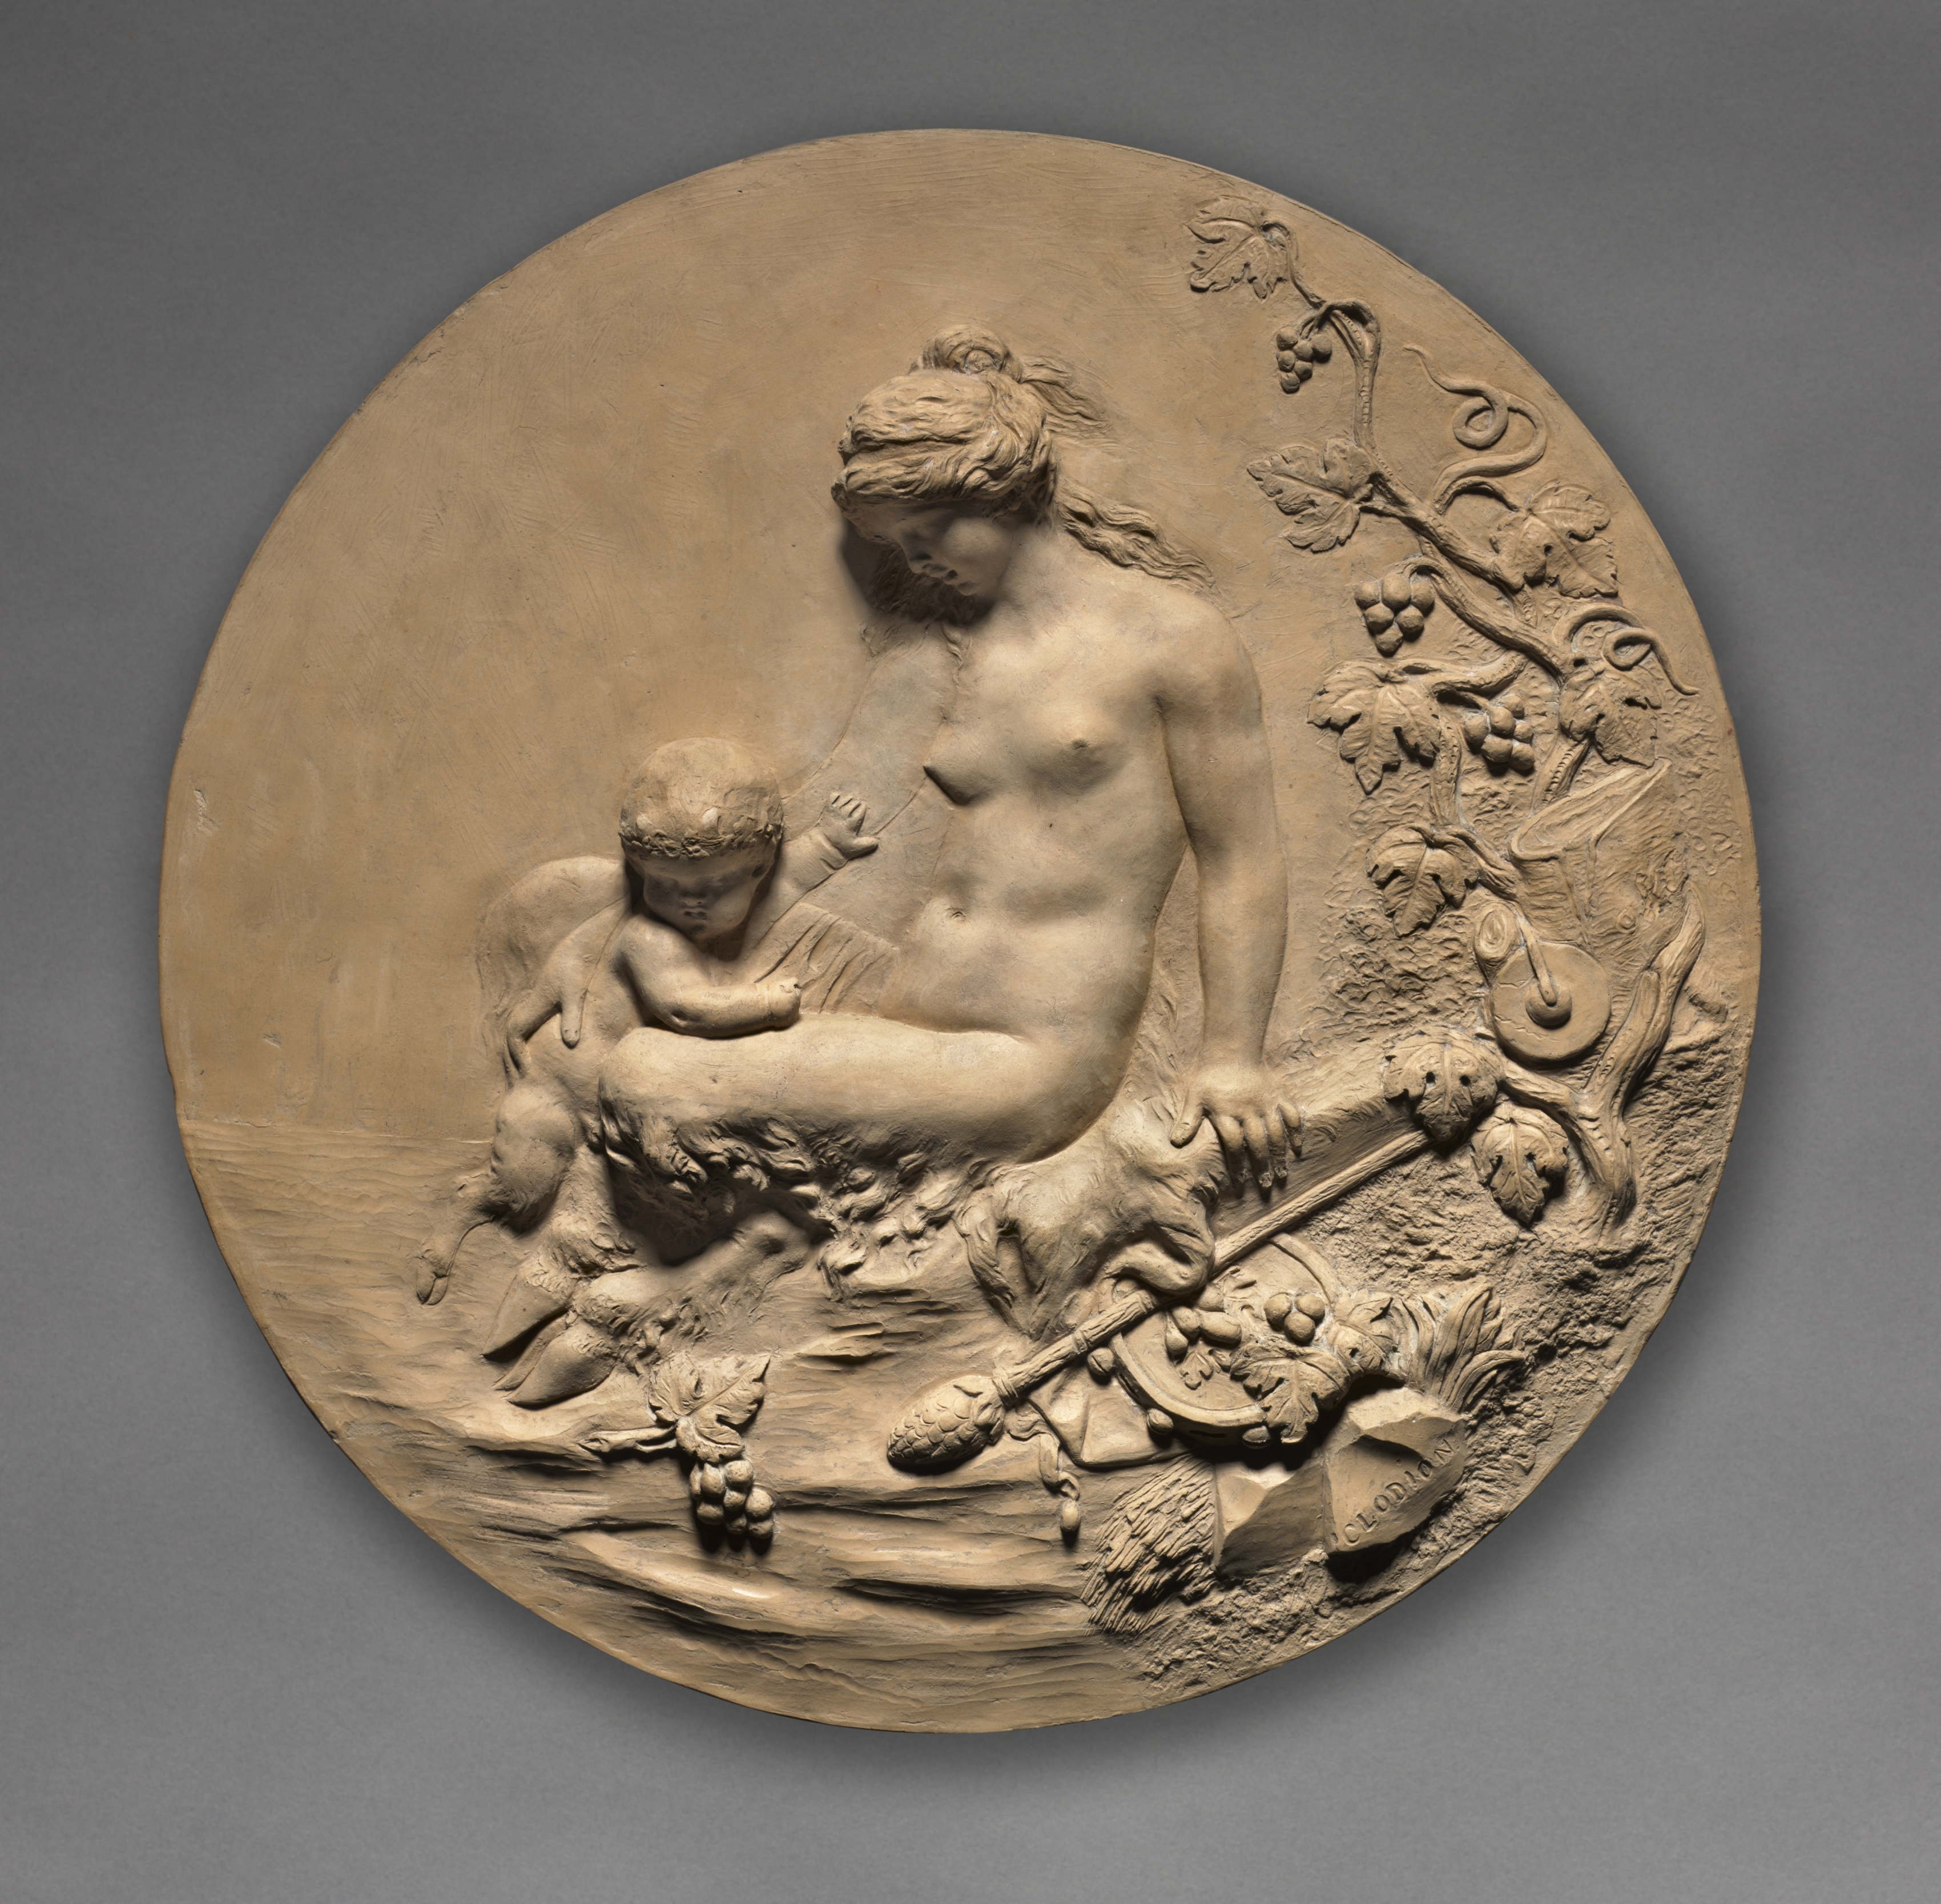 Satyress and Child